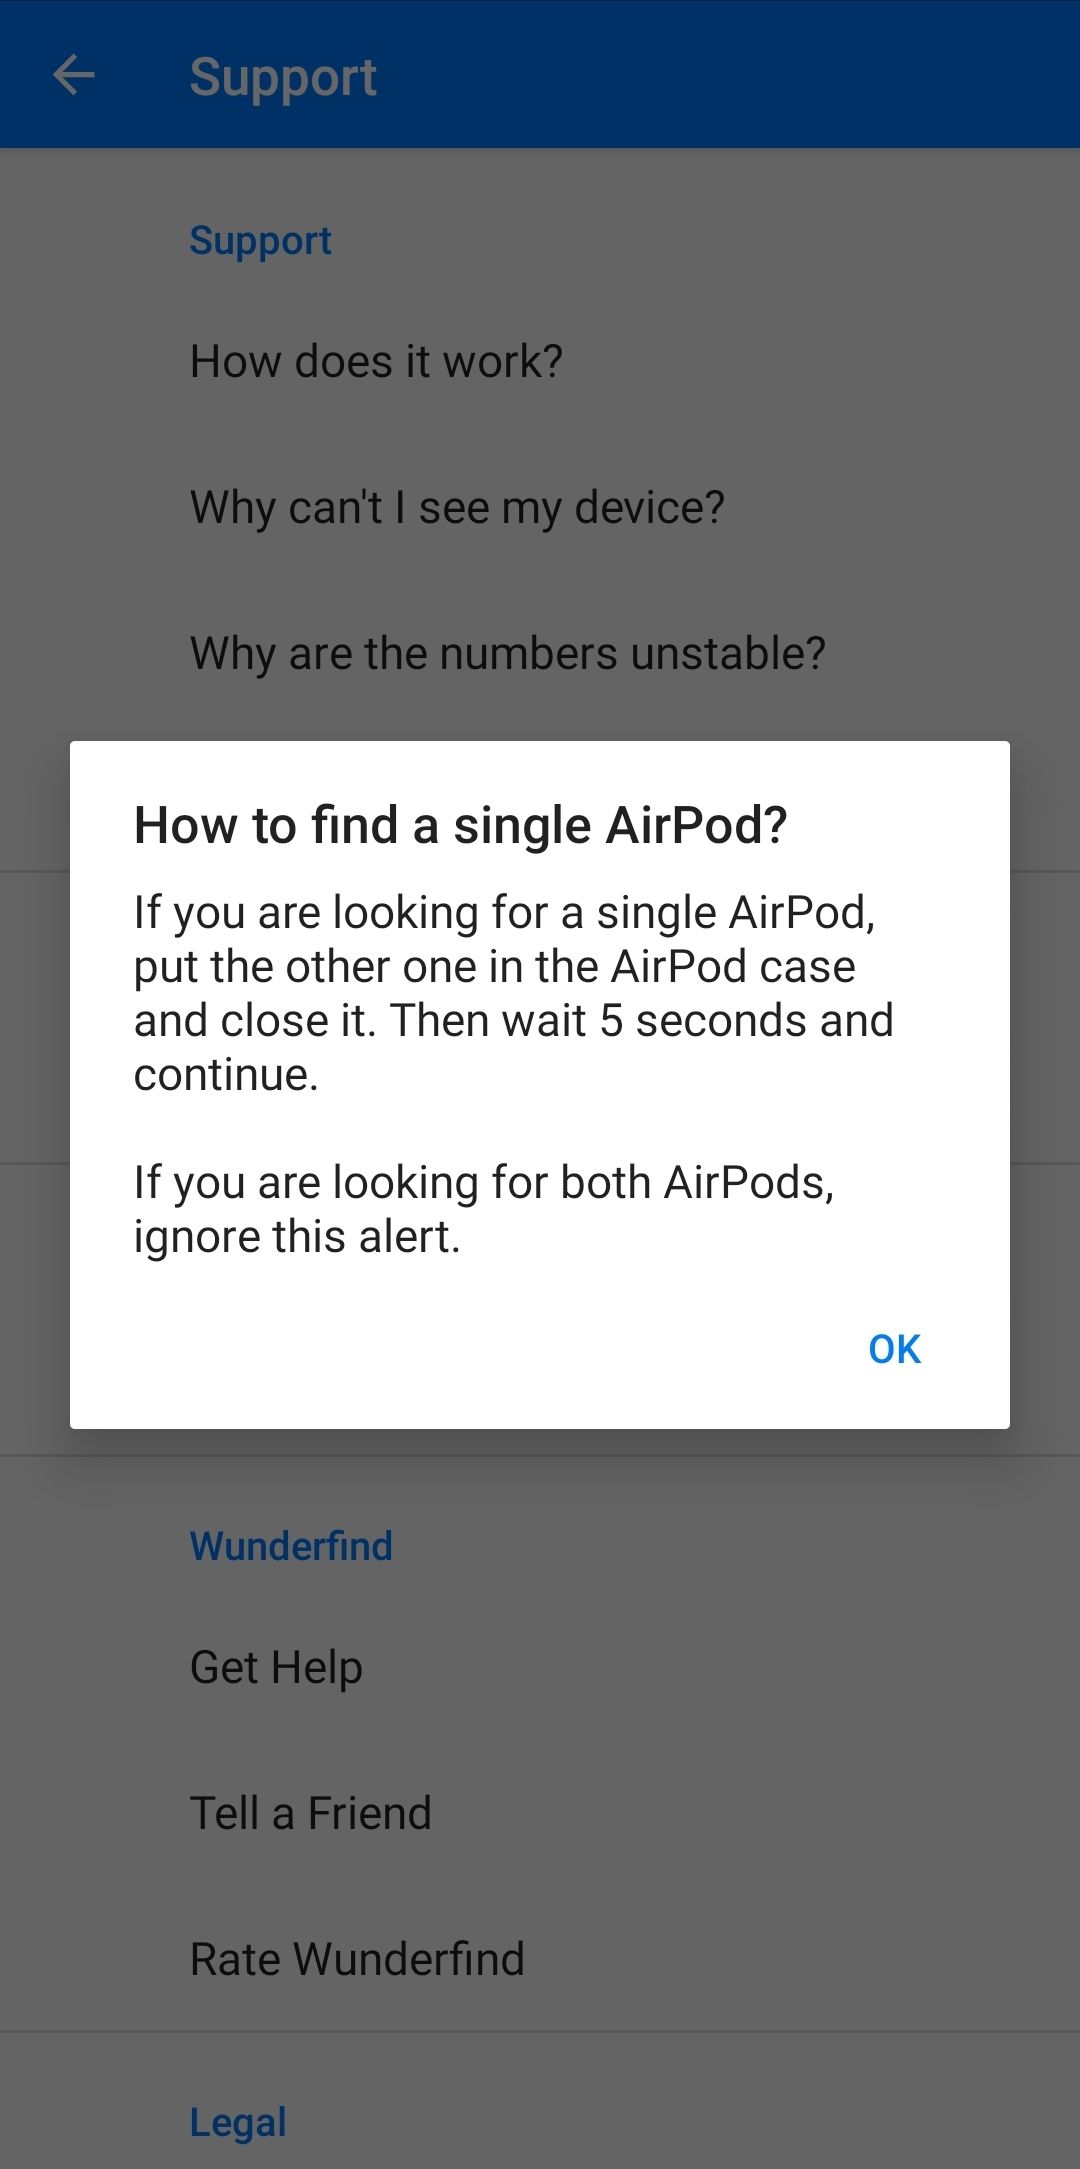 Wunderfind app showing instructions for finding an AirPod